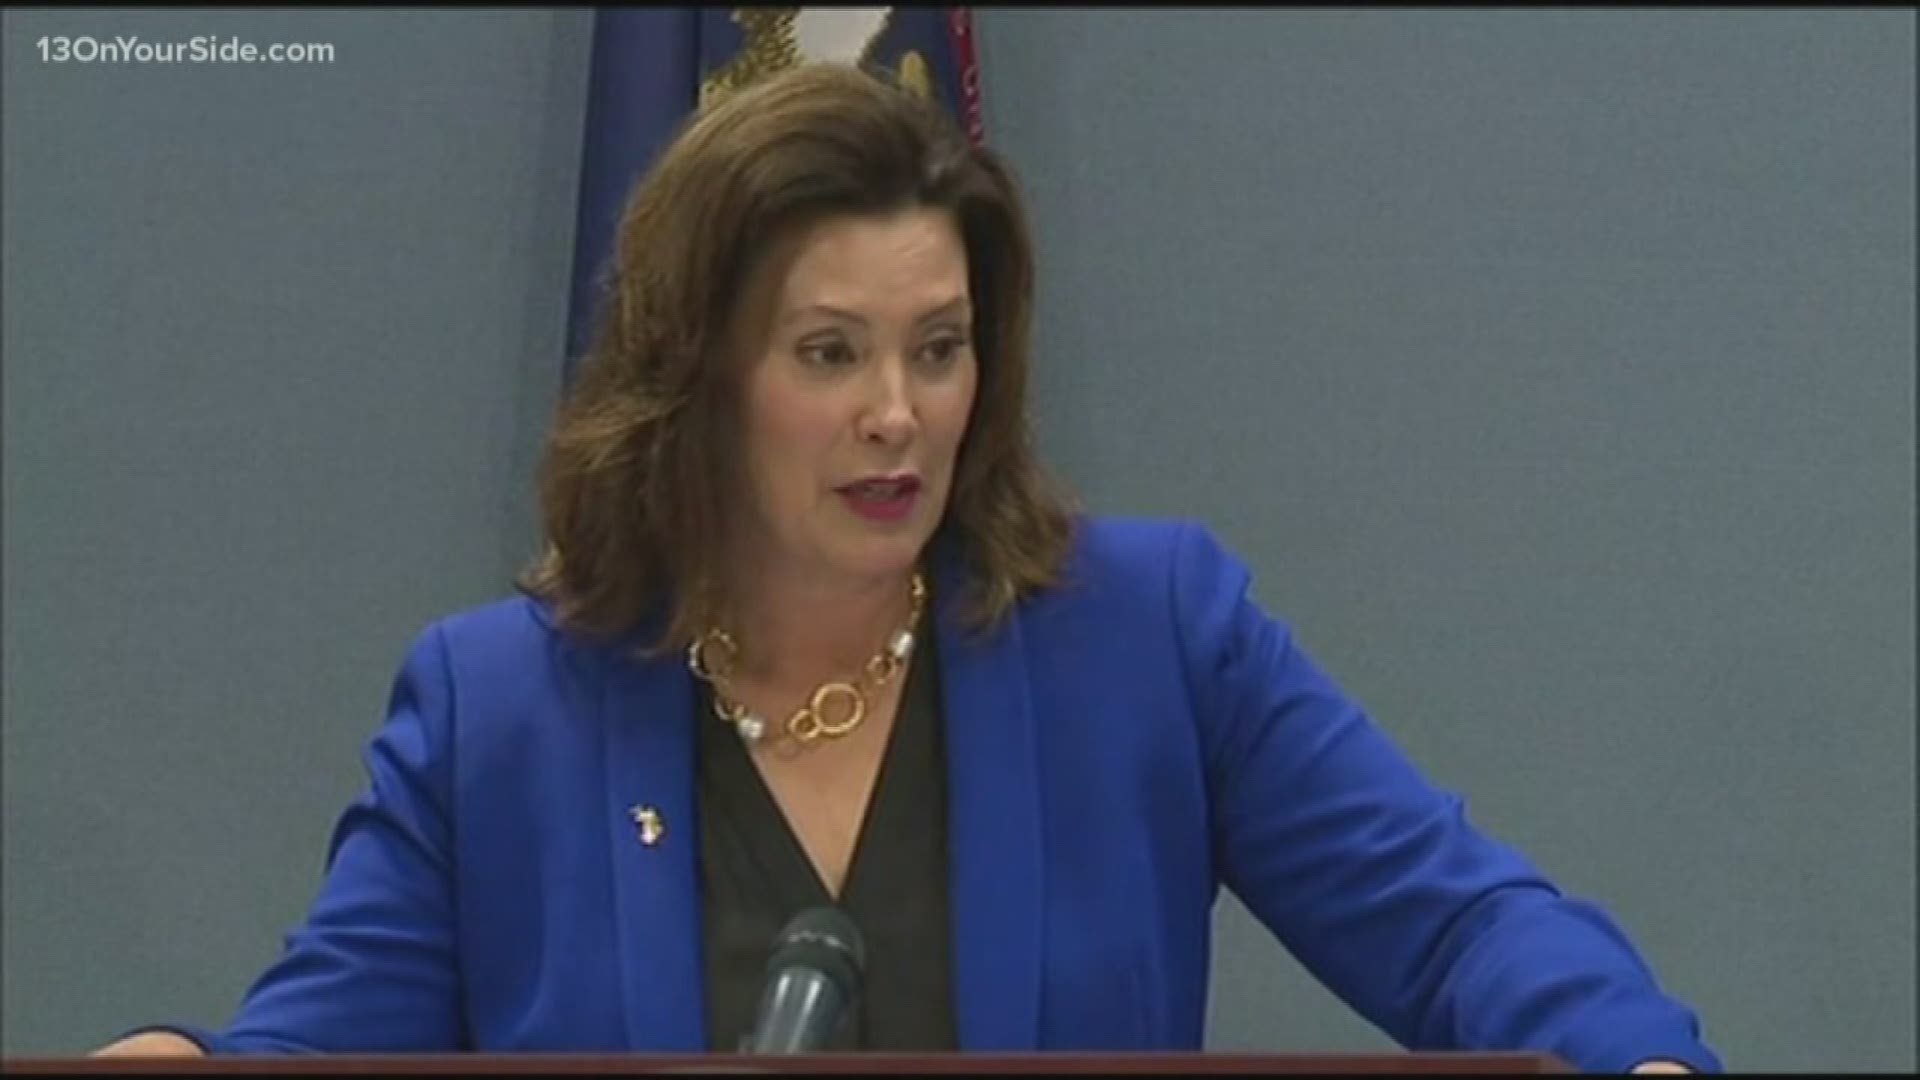 Whitmer says she refuses to "kick the can down the road."